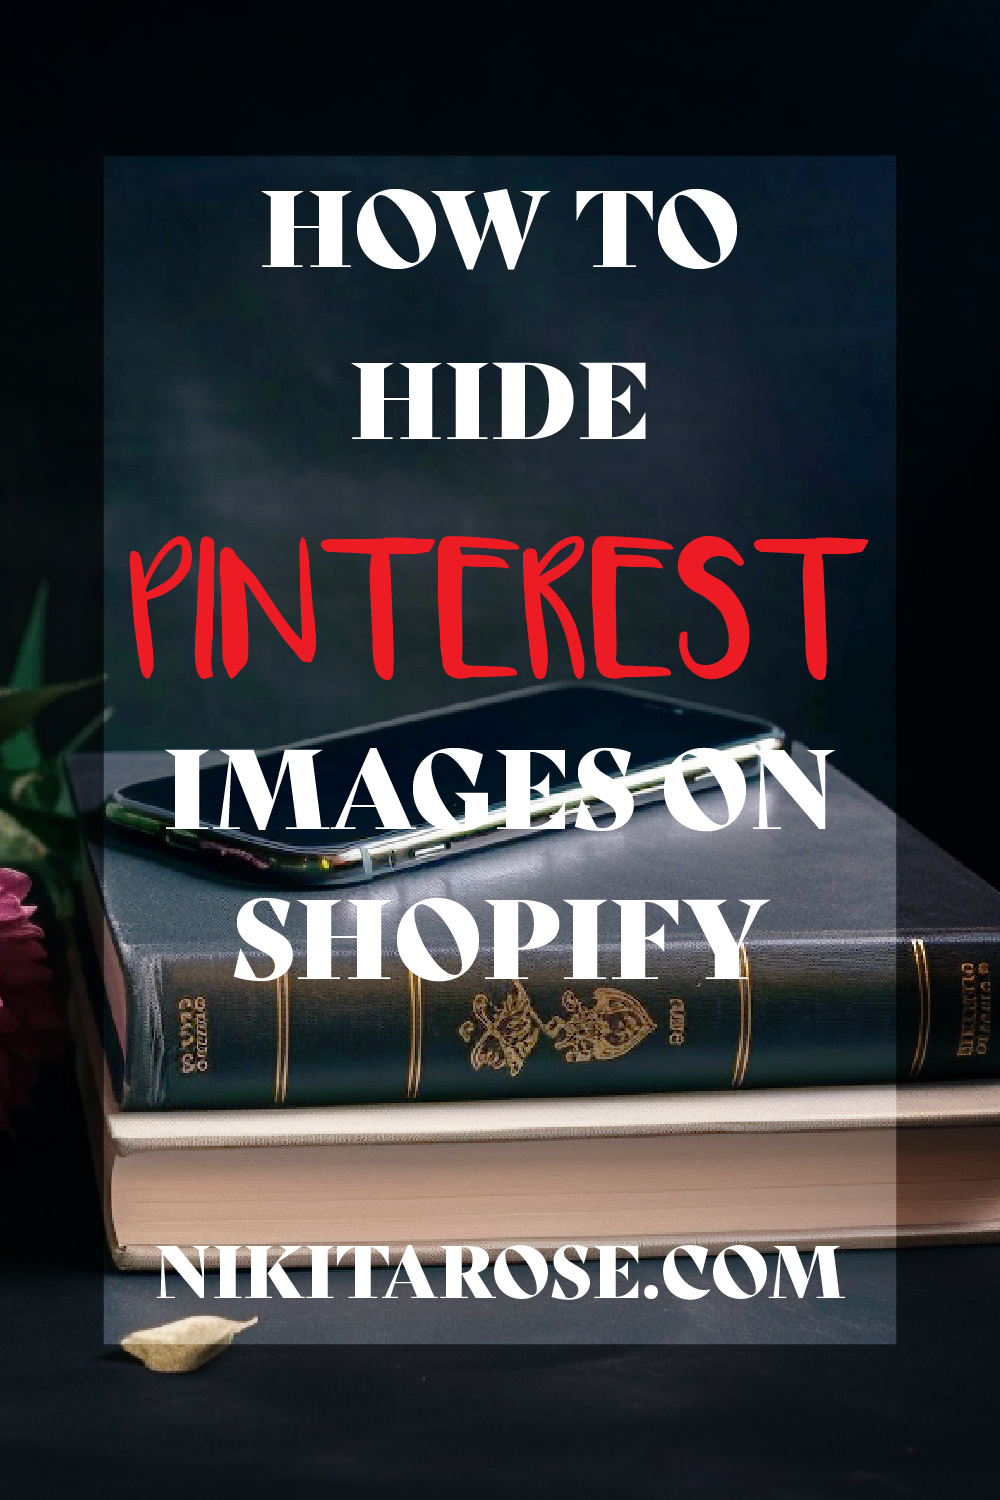 How to add hidden images to your Shopify blog posts to increase Alternative Pins to Pinterest